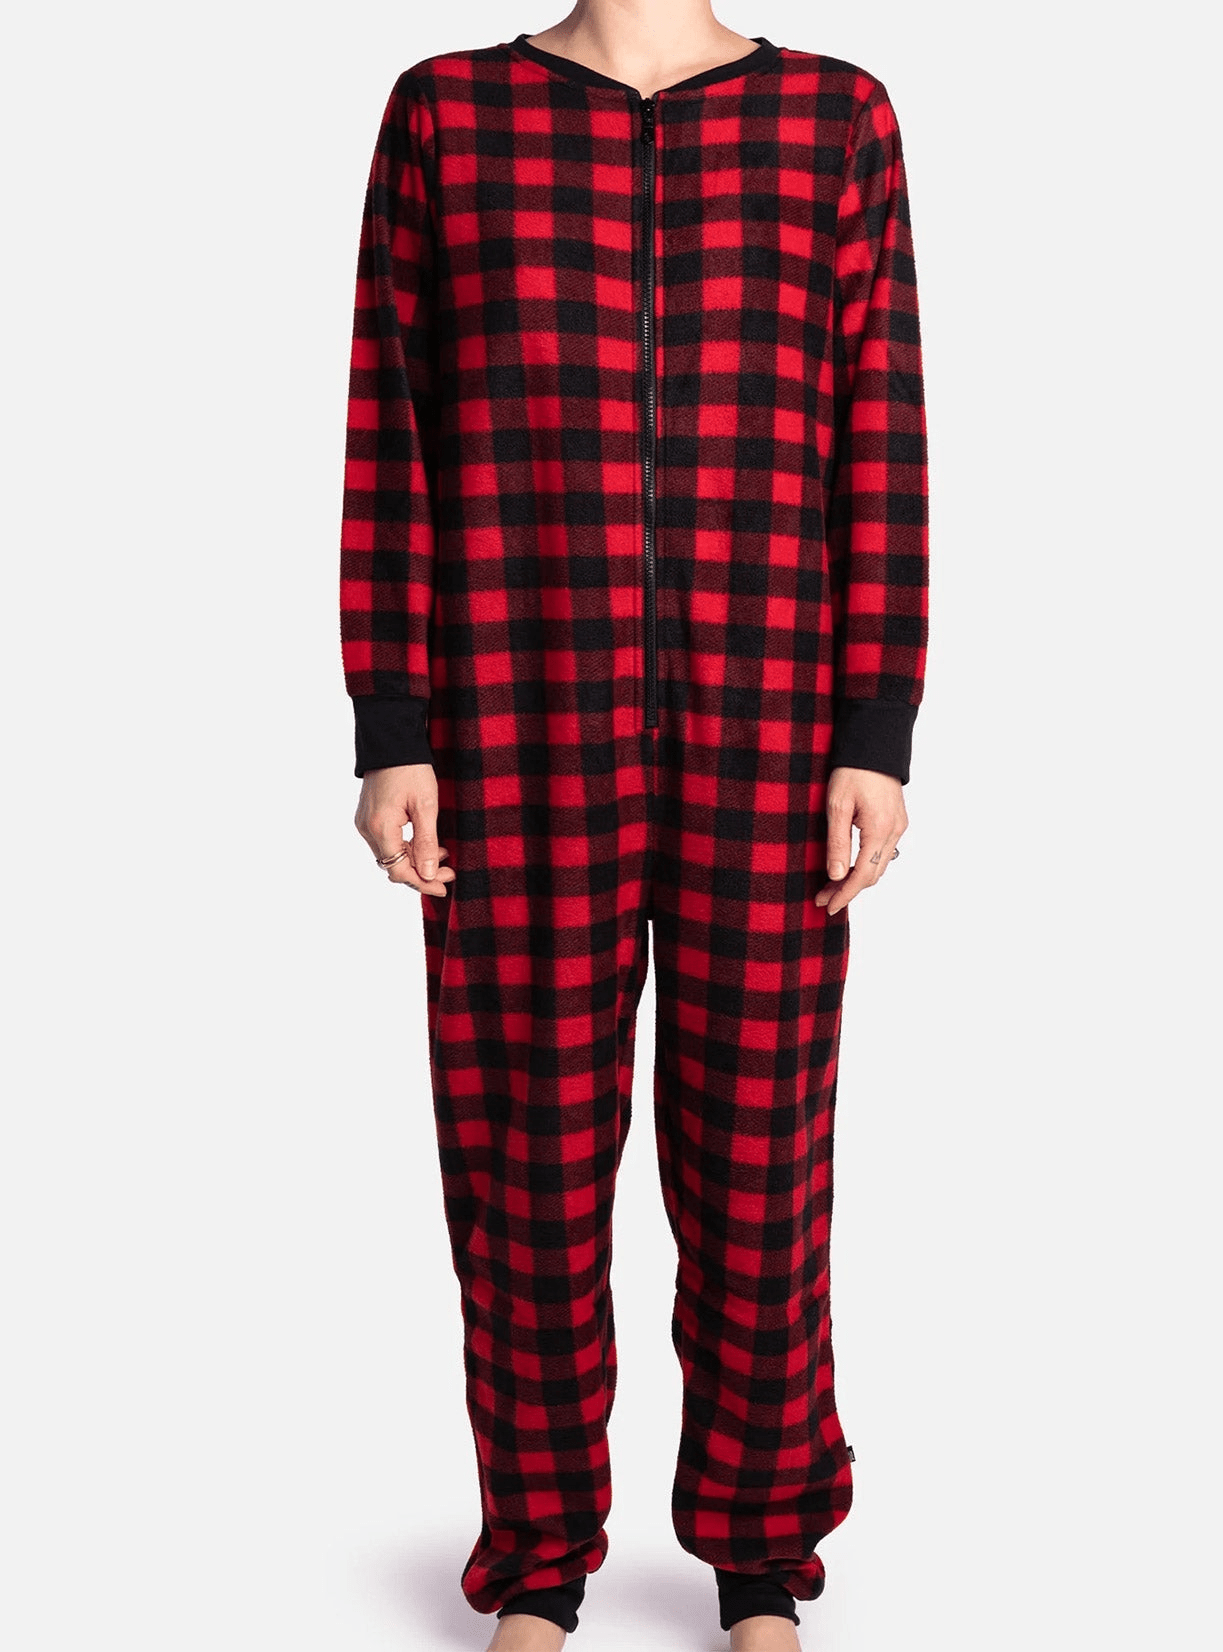 Dog and Pet Stuff Default Buy One Dog Onesie Plaid Red Get Free Human Matching